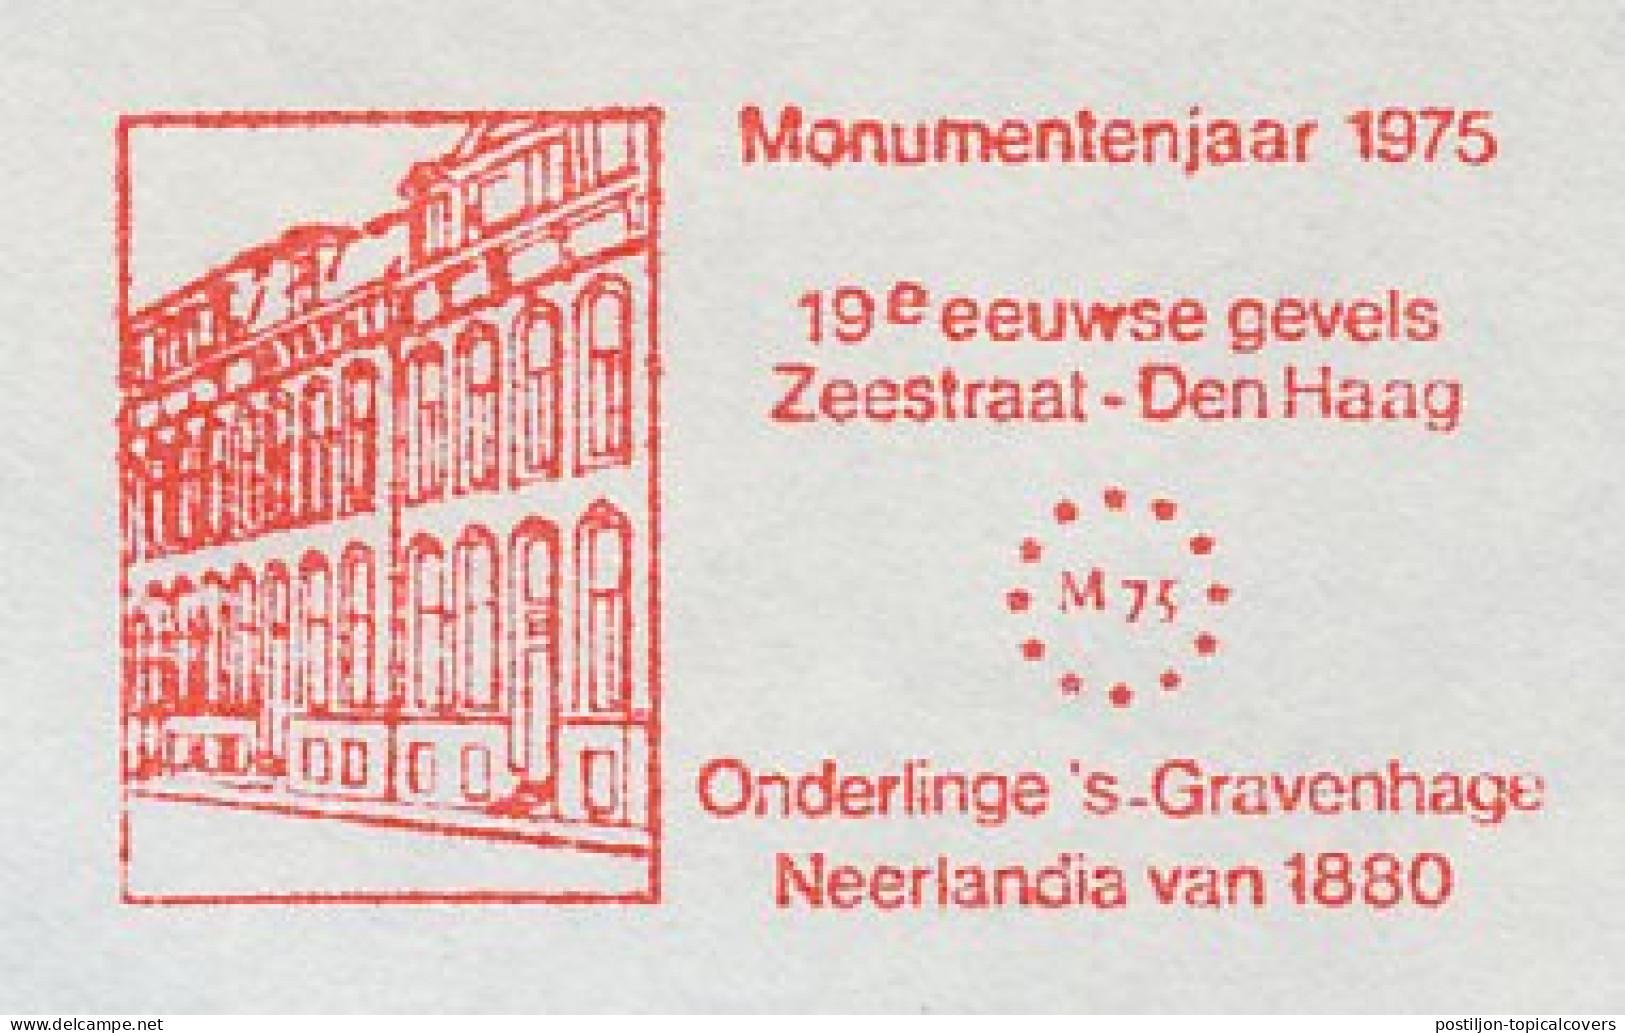 Meter Cover Netherlands 1975 Monument Year 1975 - 19th Century Facades - The Hague - Other & Unclassified